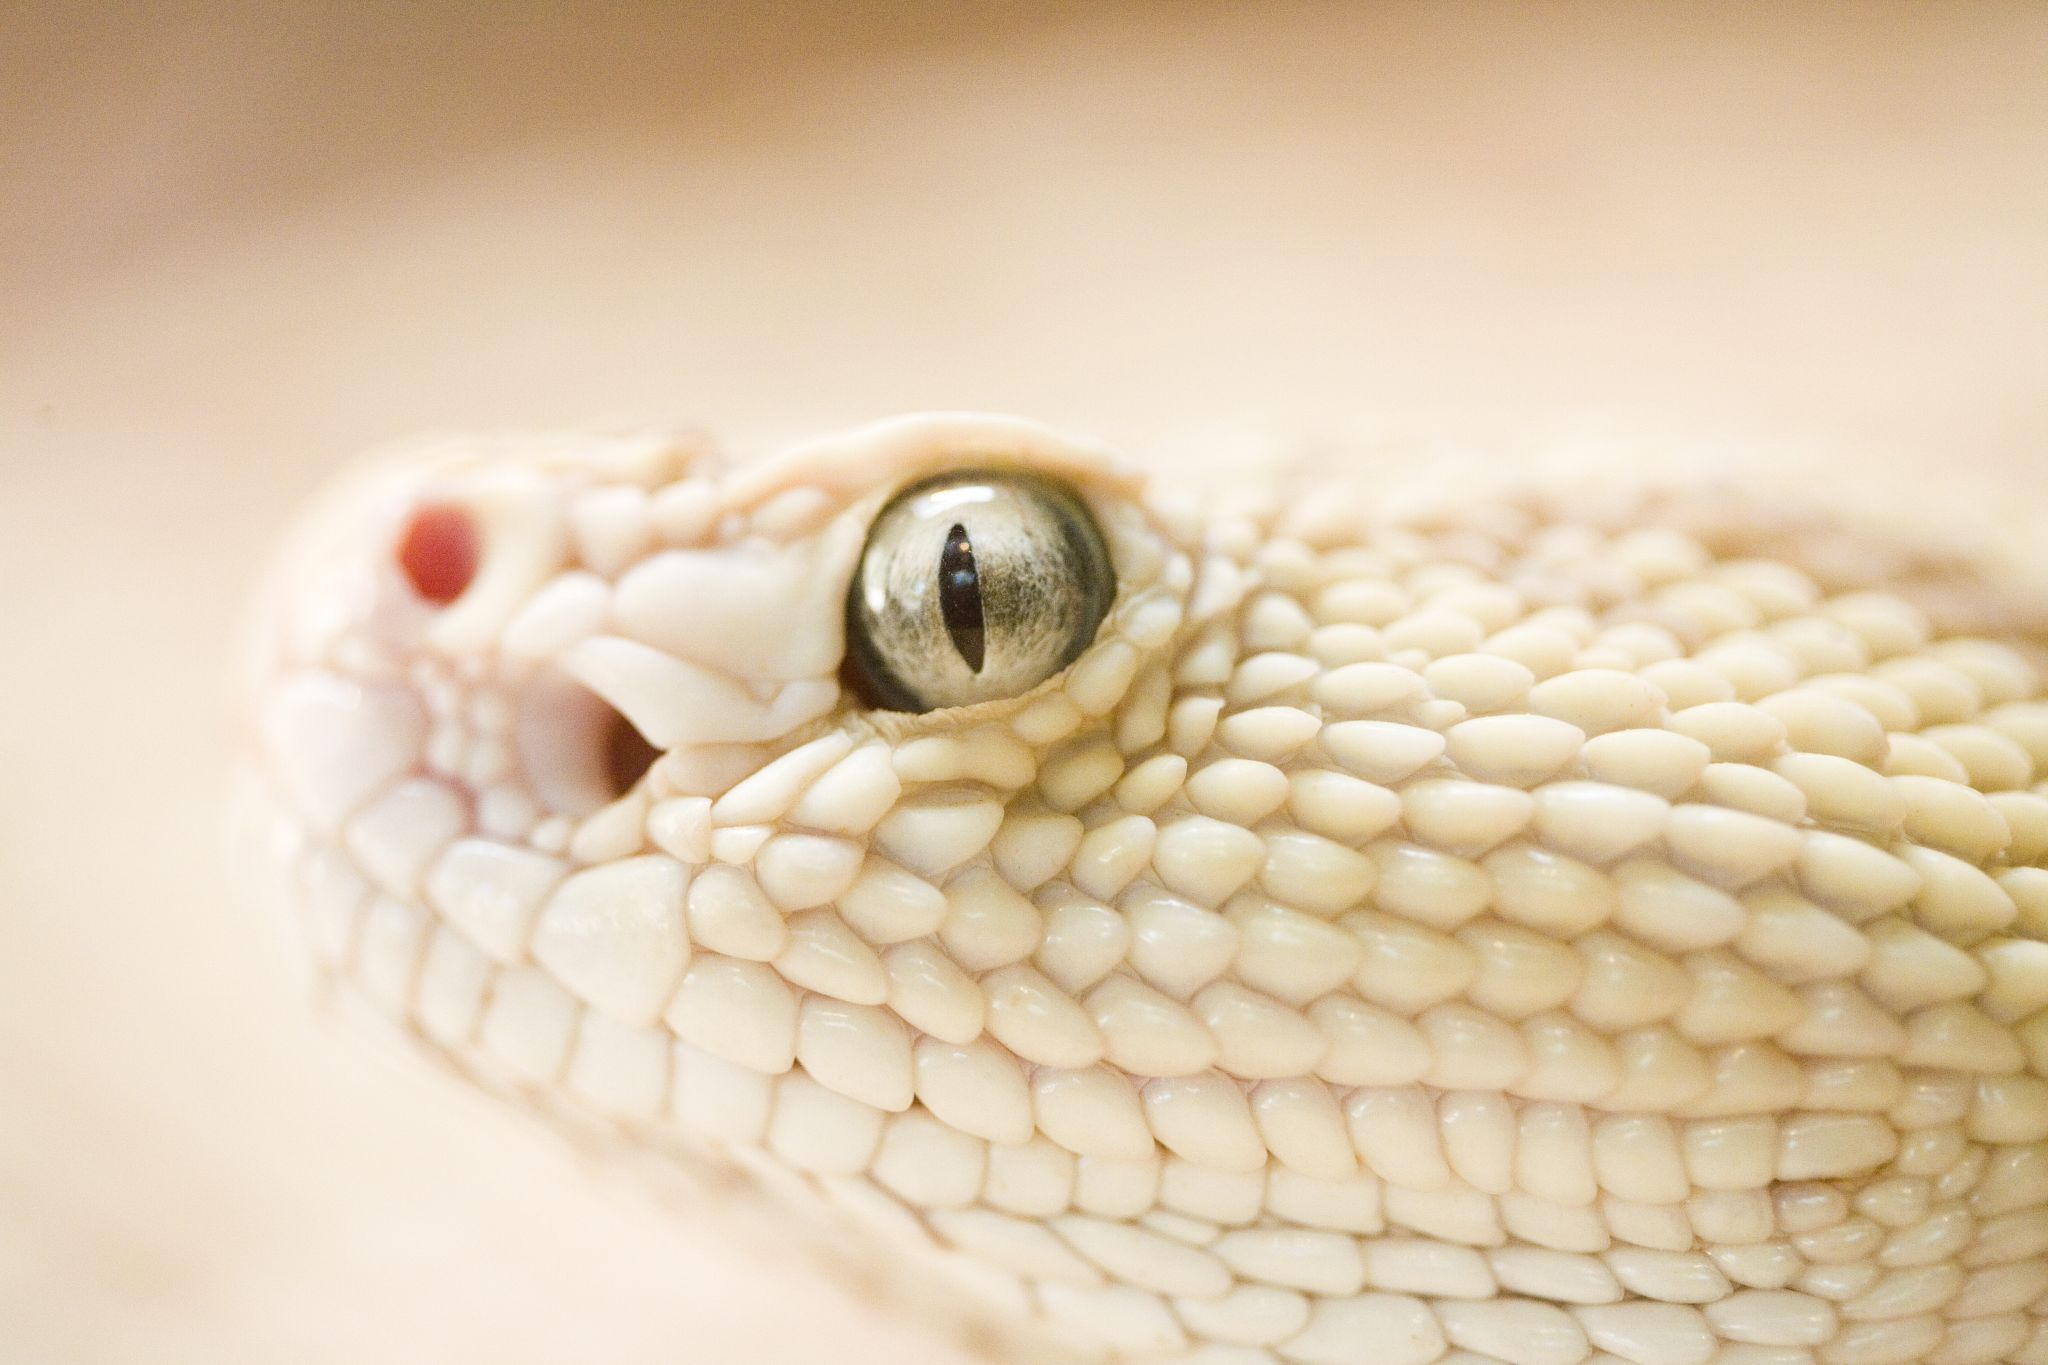 2048x1365 Wallpaper : scaled reptile, close up, snake, serpent, rattlesnake, macro photography, organism, VIPER 896788 HD Wallpapers